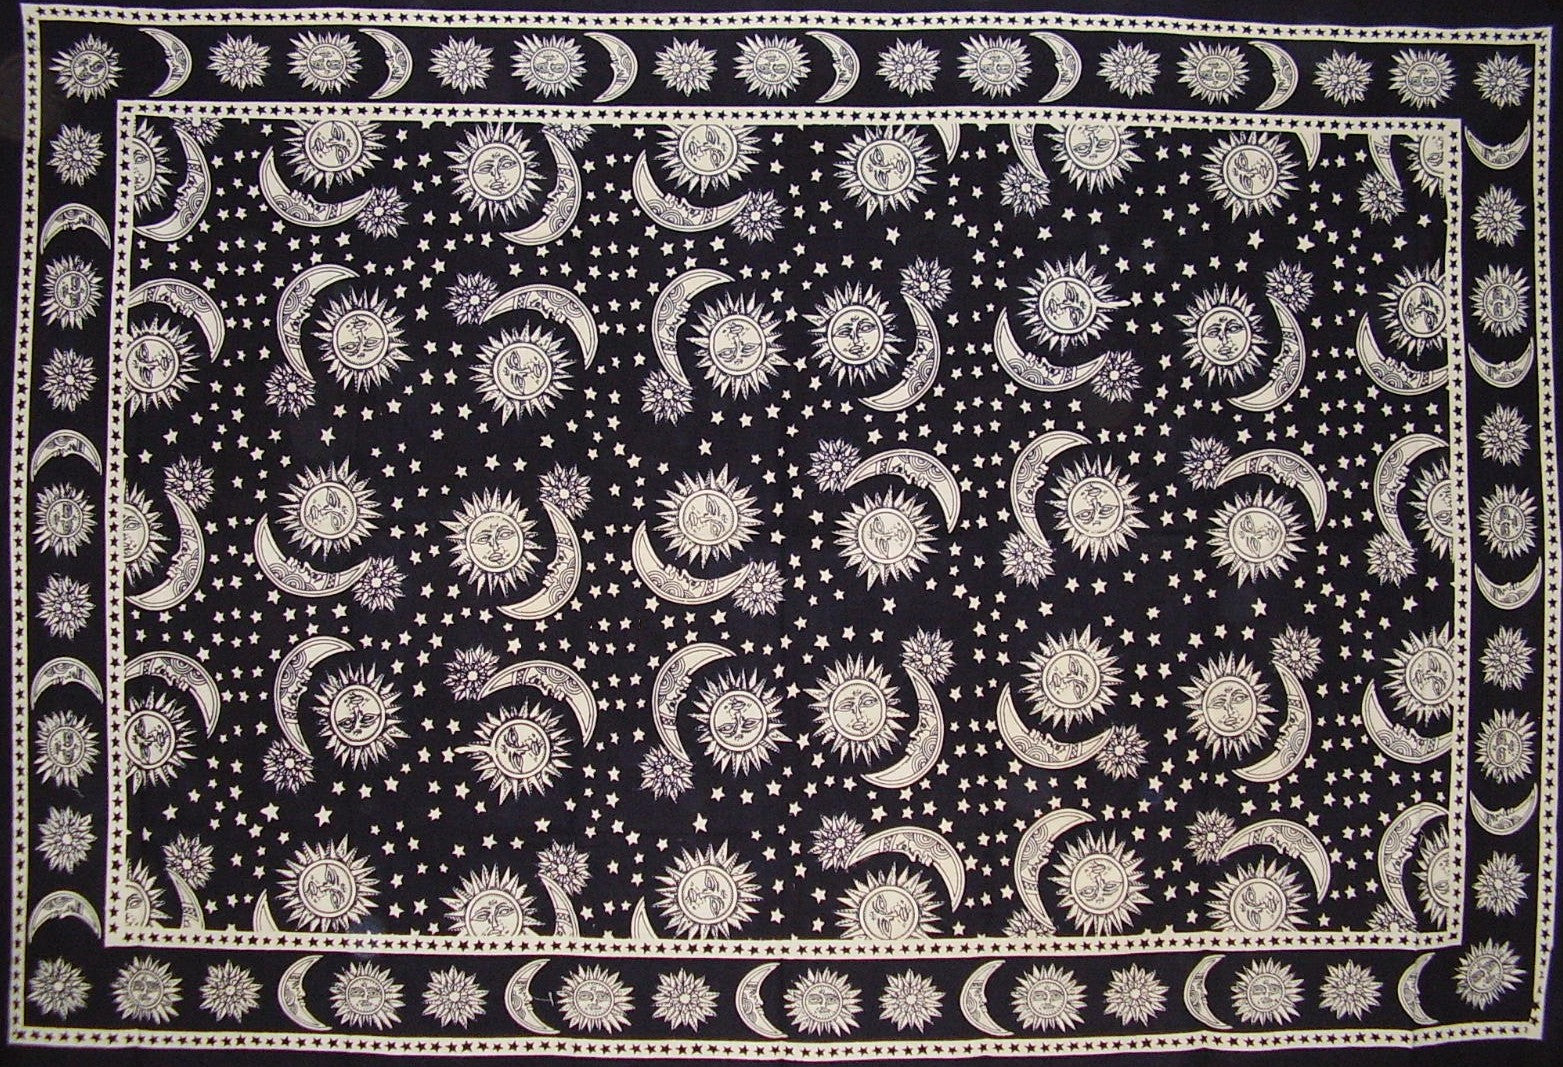 Celestial Block Print Tapestry Cotton Twin Bedspread or Tablecloth 106" x 70" Black & White